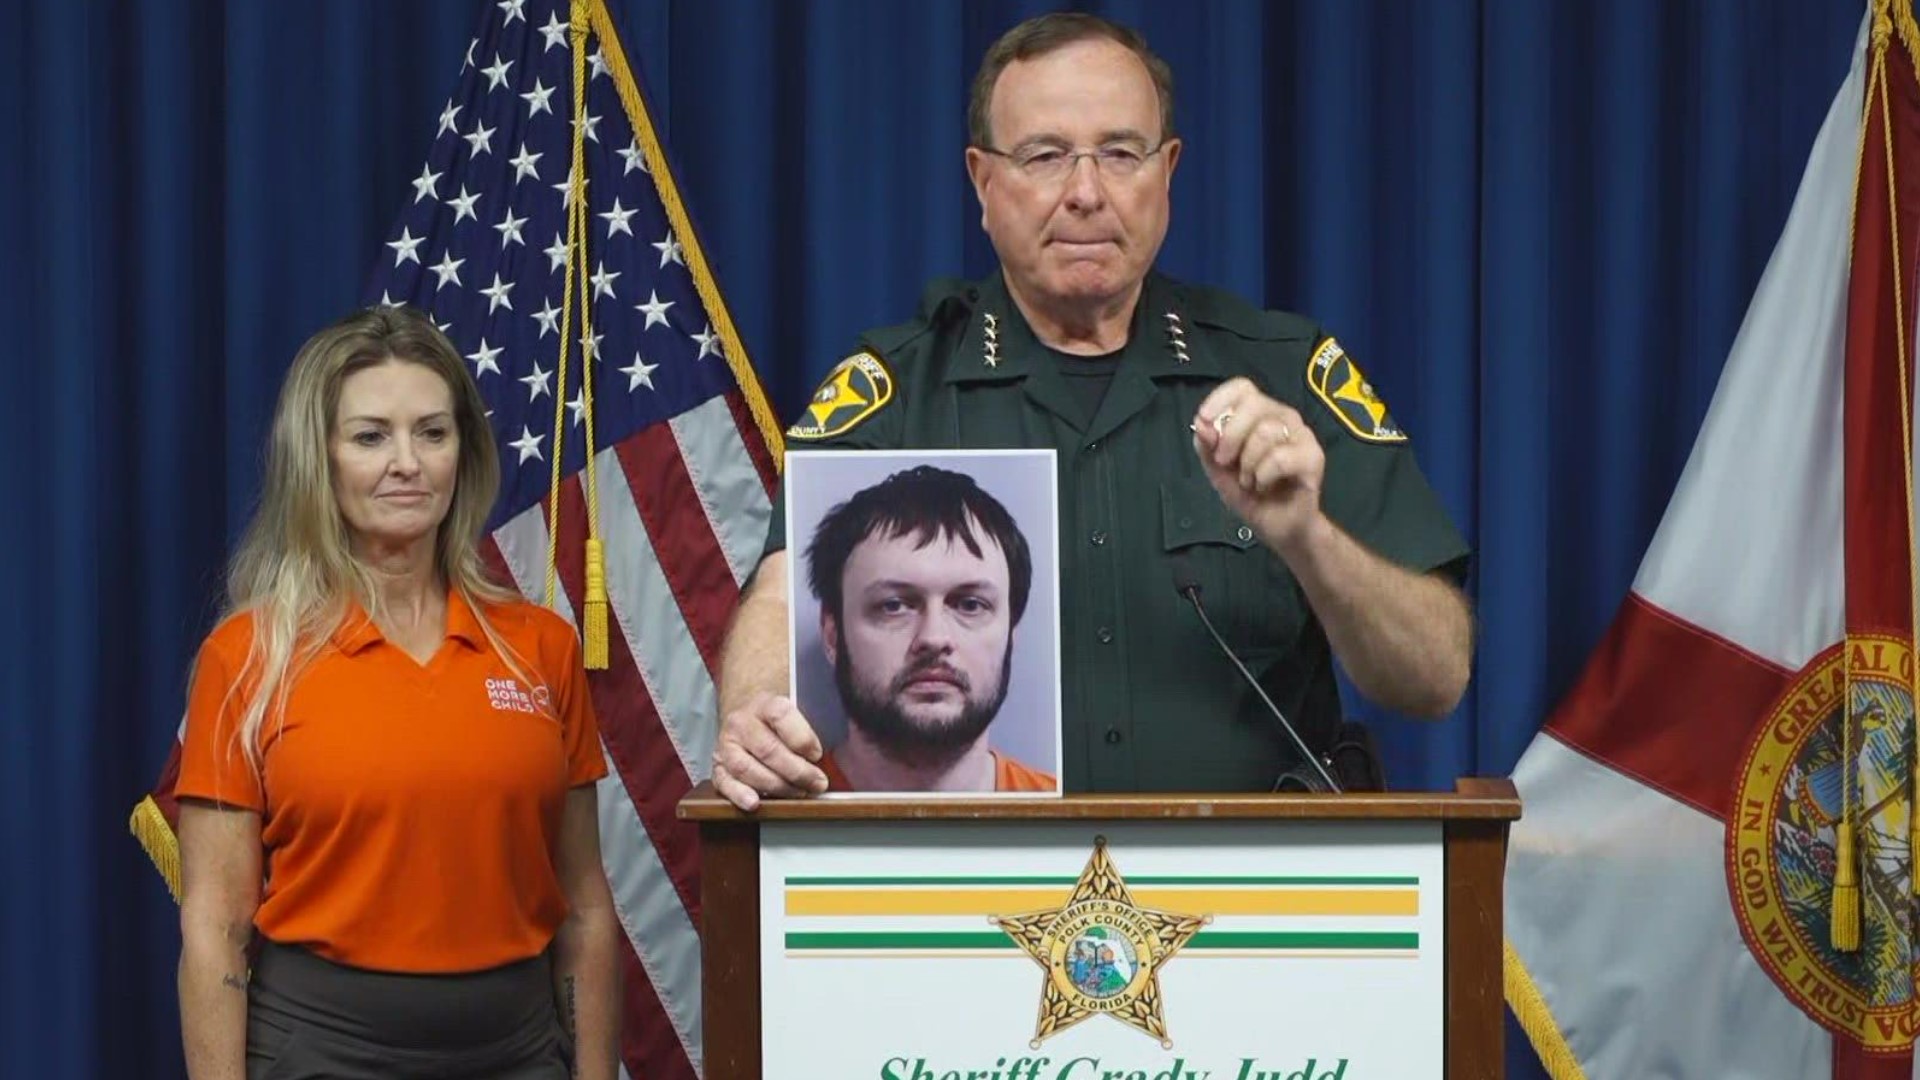 Sheriff Judd says he is charged with 1,000 counts of child pornography.